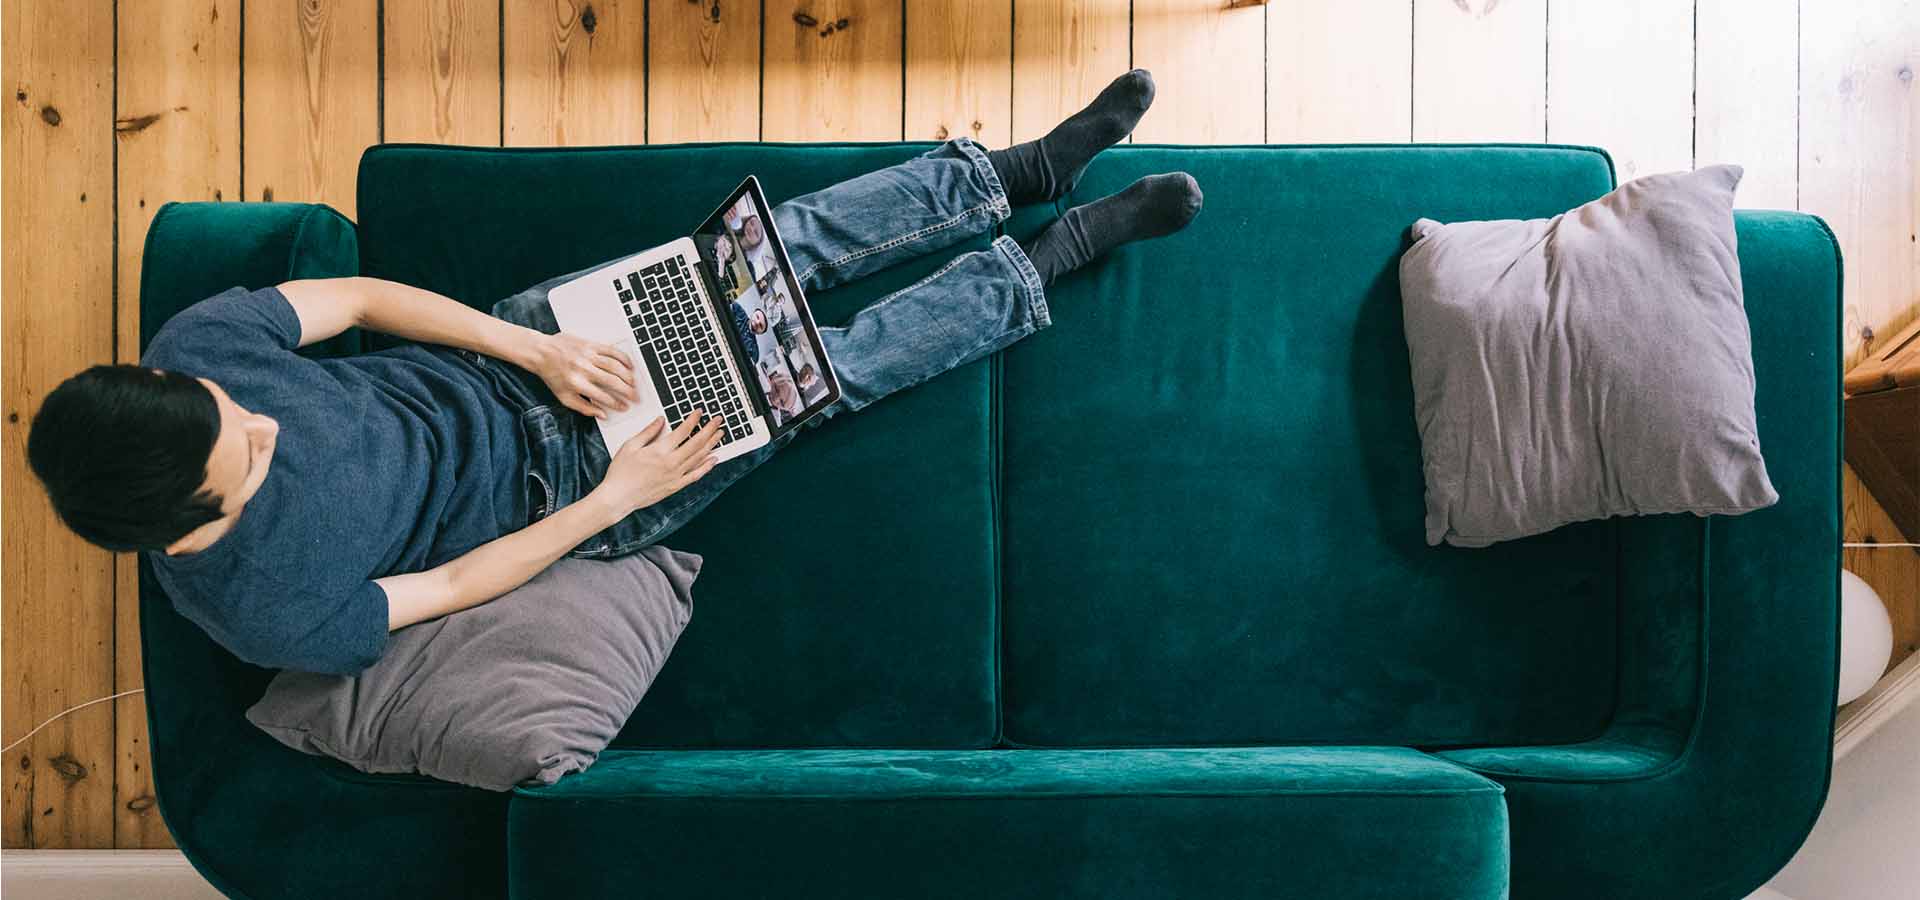 Guy on green couch